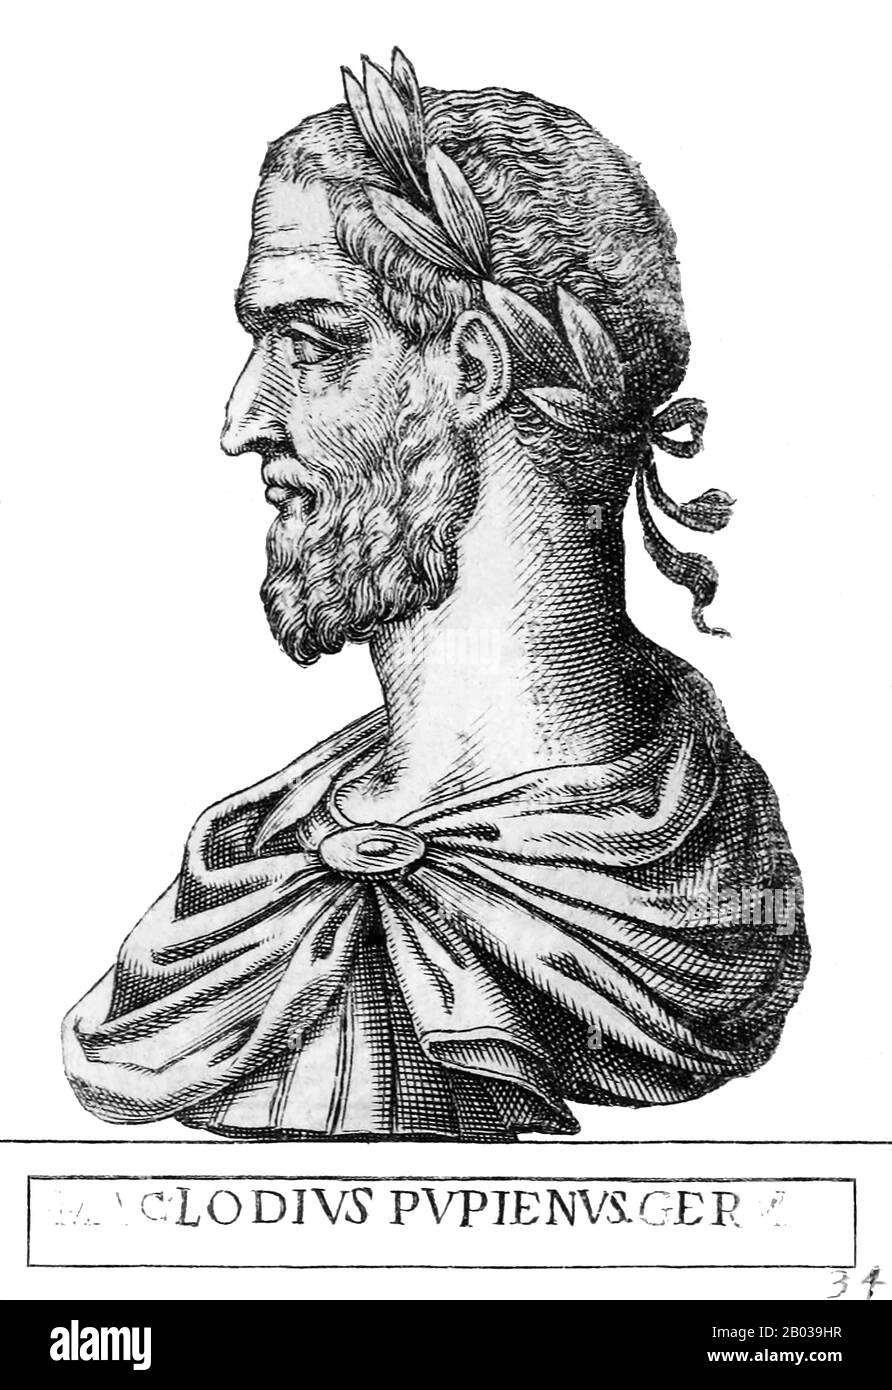 Pupienus (165/170-238), also known as Pupienus Maximus, was a senator in the Roman Senate who had risen to power and influence through military success under the rule of the Severan dynasty. He served two terms as Consul, and became an important member of the Senate.  When Gordian I and his son were proclaimed Emperors in 238, the Senate immediately recognised them in defiance of Emperor Maximinus Thrax. Pupienus, an elderly man by then, was put on a committee to coordinate efforts to thwart Maximinus until the Gordians could arrive in Rome. The Gordians died less than a month after their decl Stock Photo